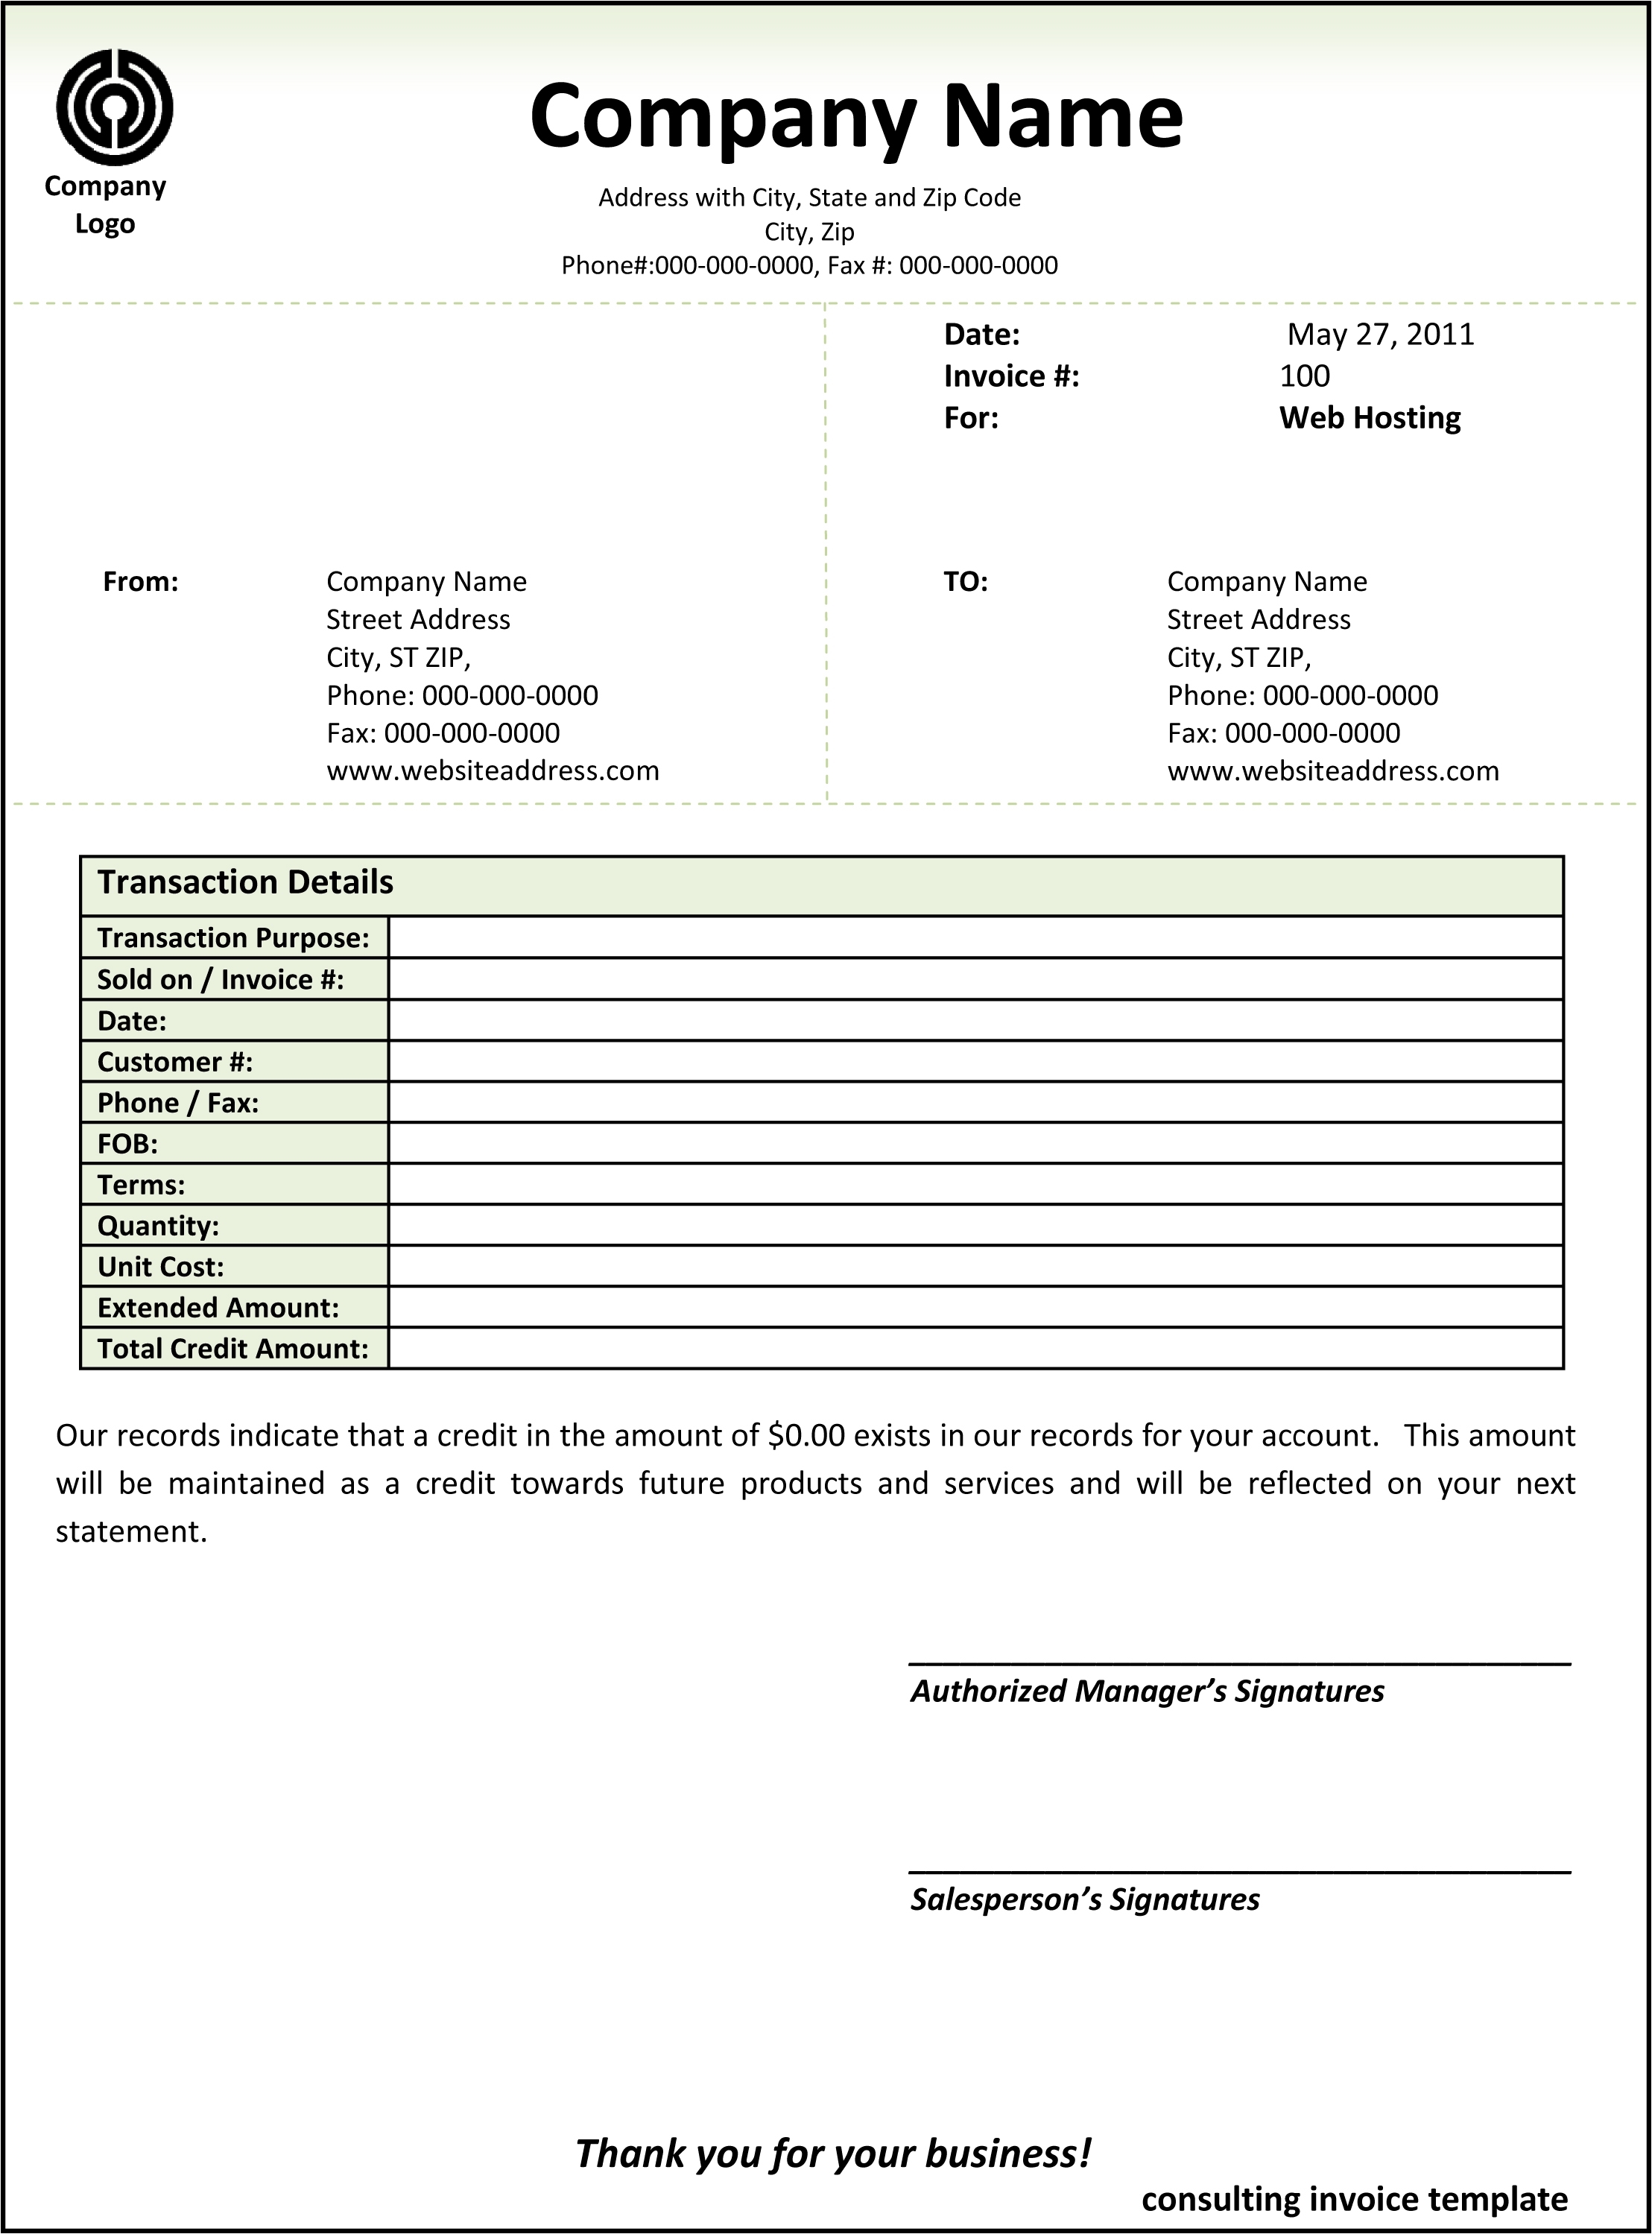 sample consulting invoice invoice template free 2016 consulting invoice templates